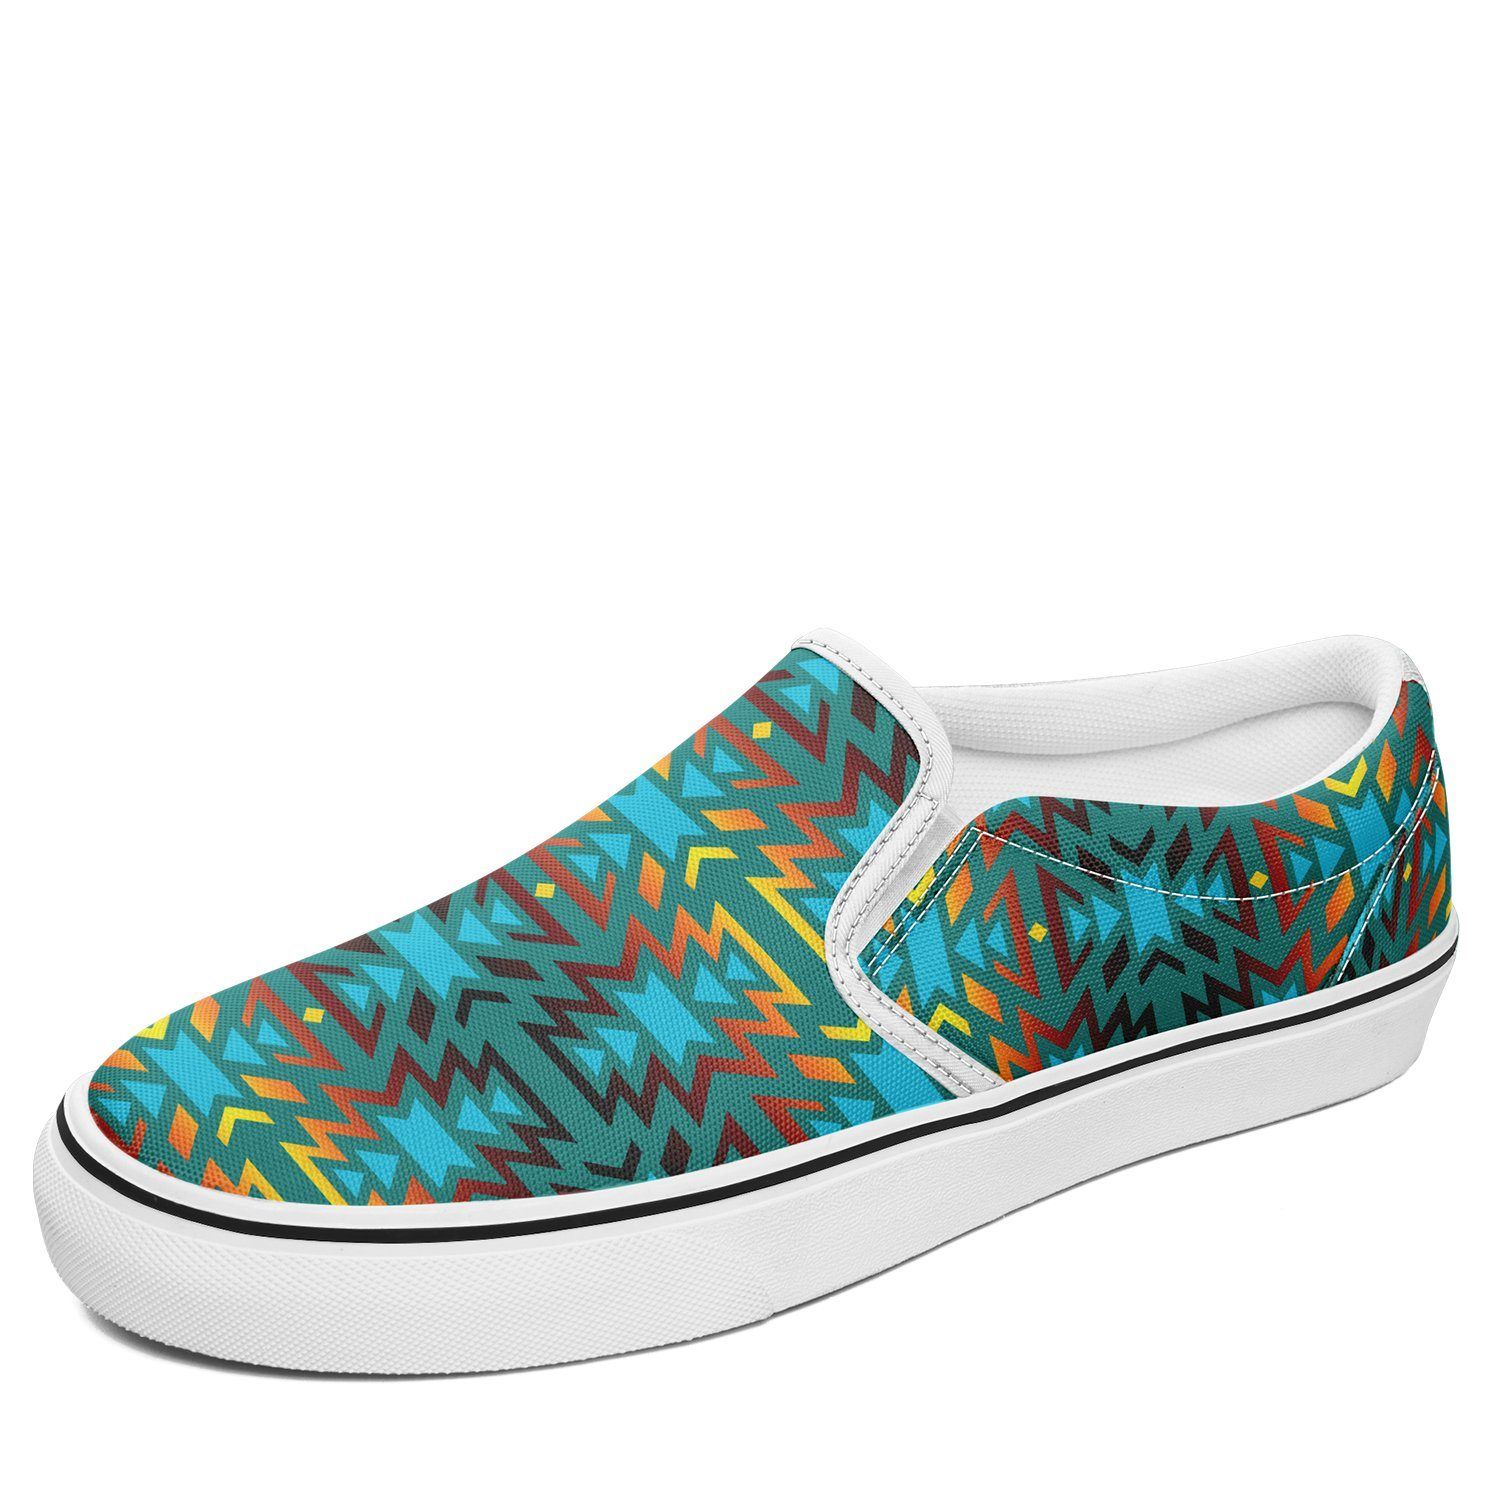 Fire Colors and Turquoise Teal Otoyimm Kid's Canvas Slip On Shoes 49 Dzine US Youth 1 / EUR 32 White Sole 